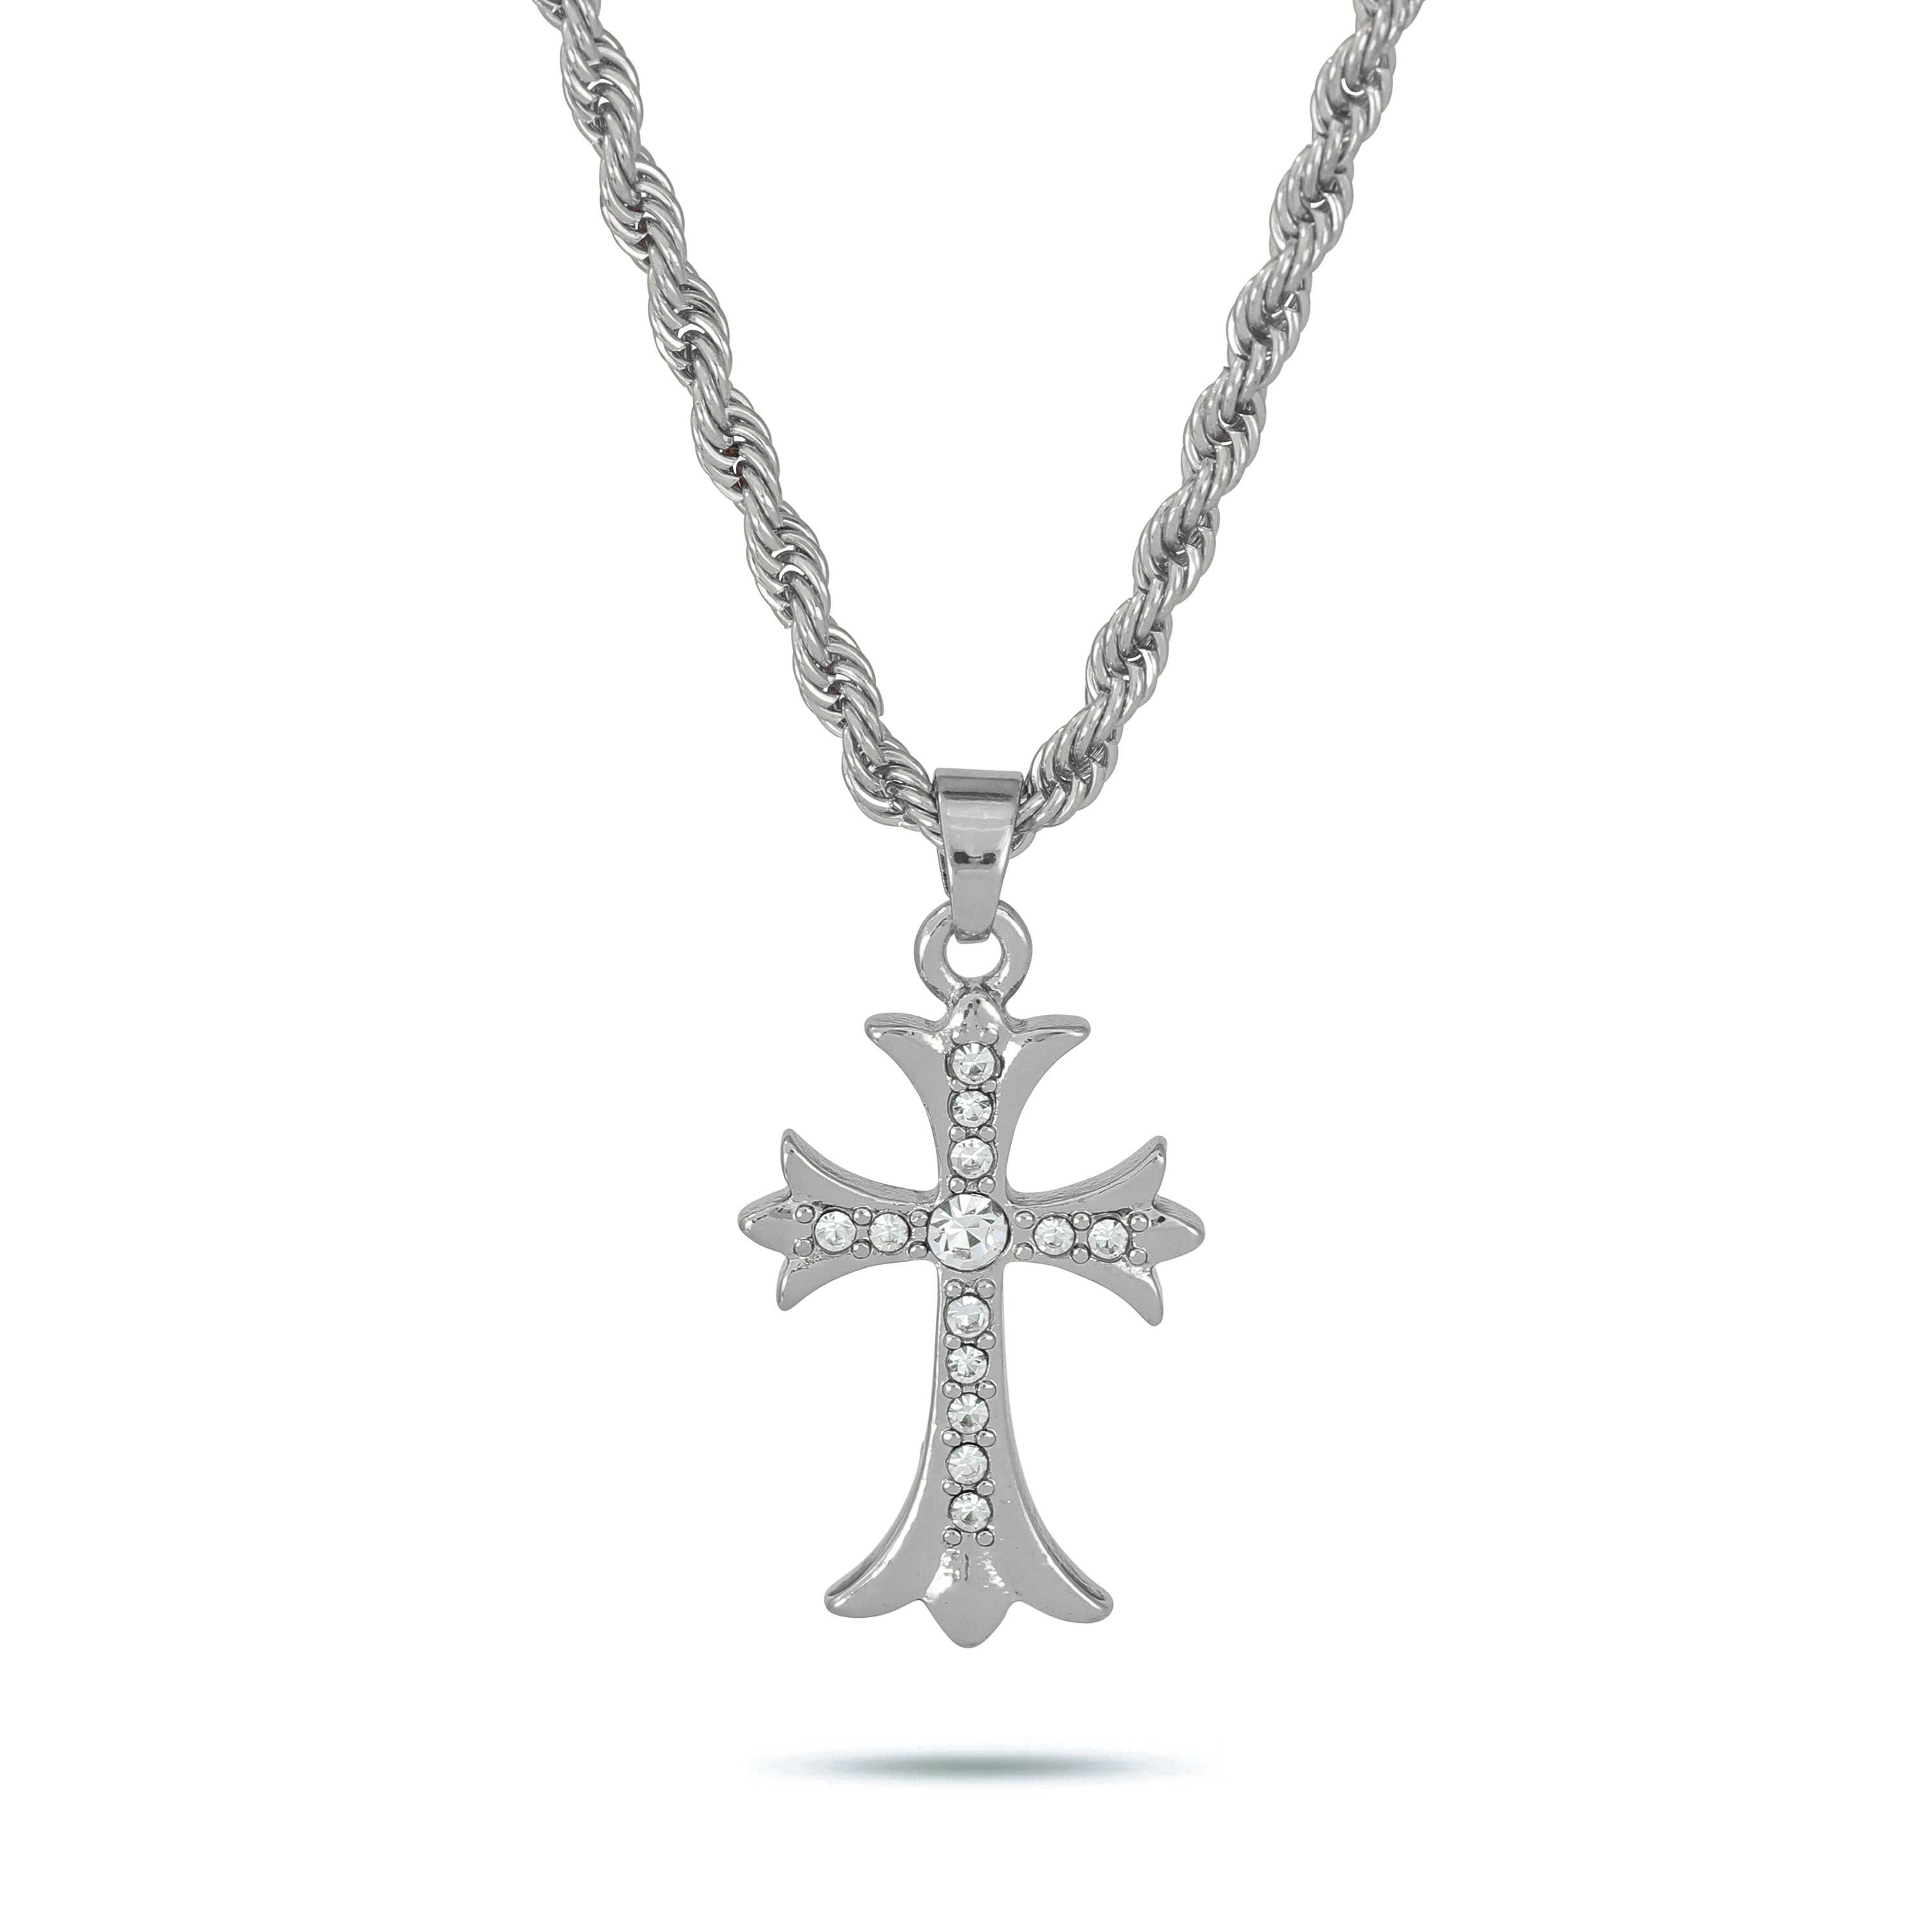 MINI ICED CROSS NECKLACE SILVER